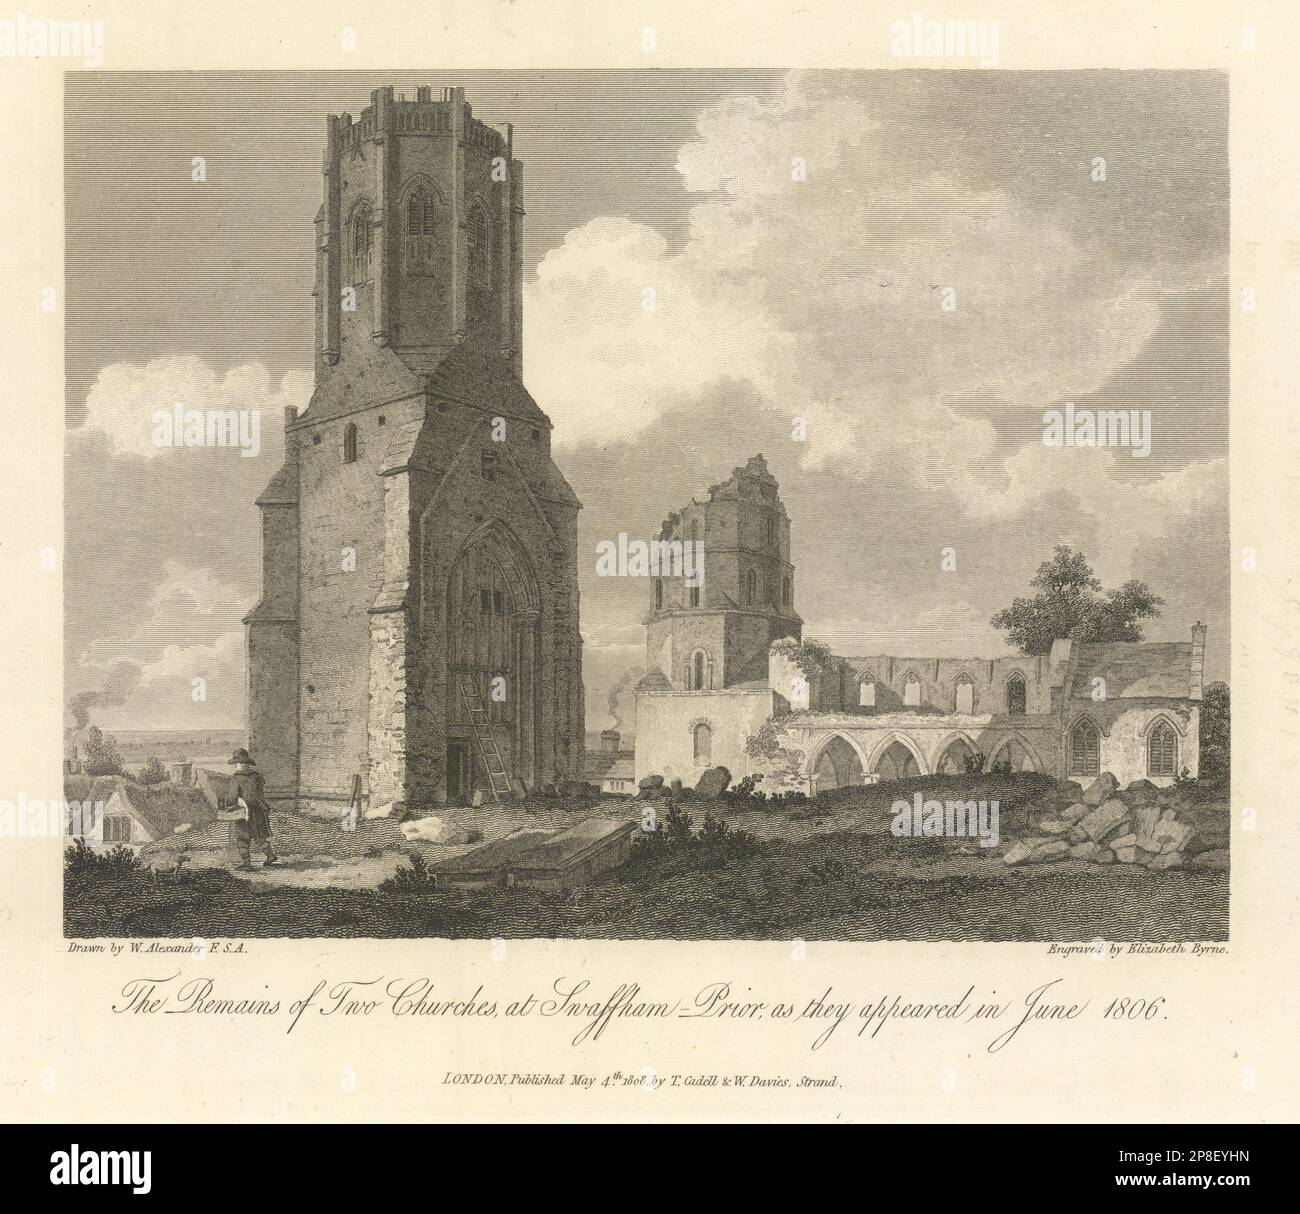 The remains of two churches at Swaffham Prior in June 1806. ALEXANDER 1810 Stock Photo